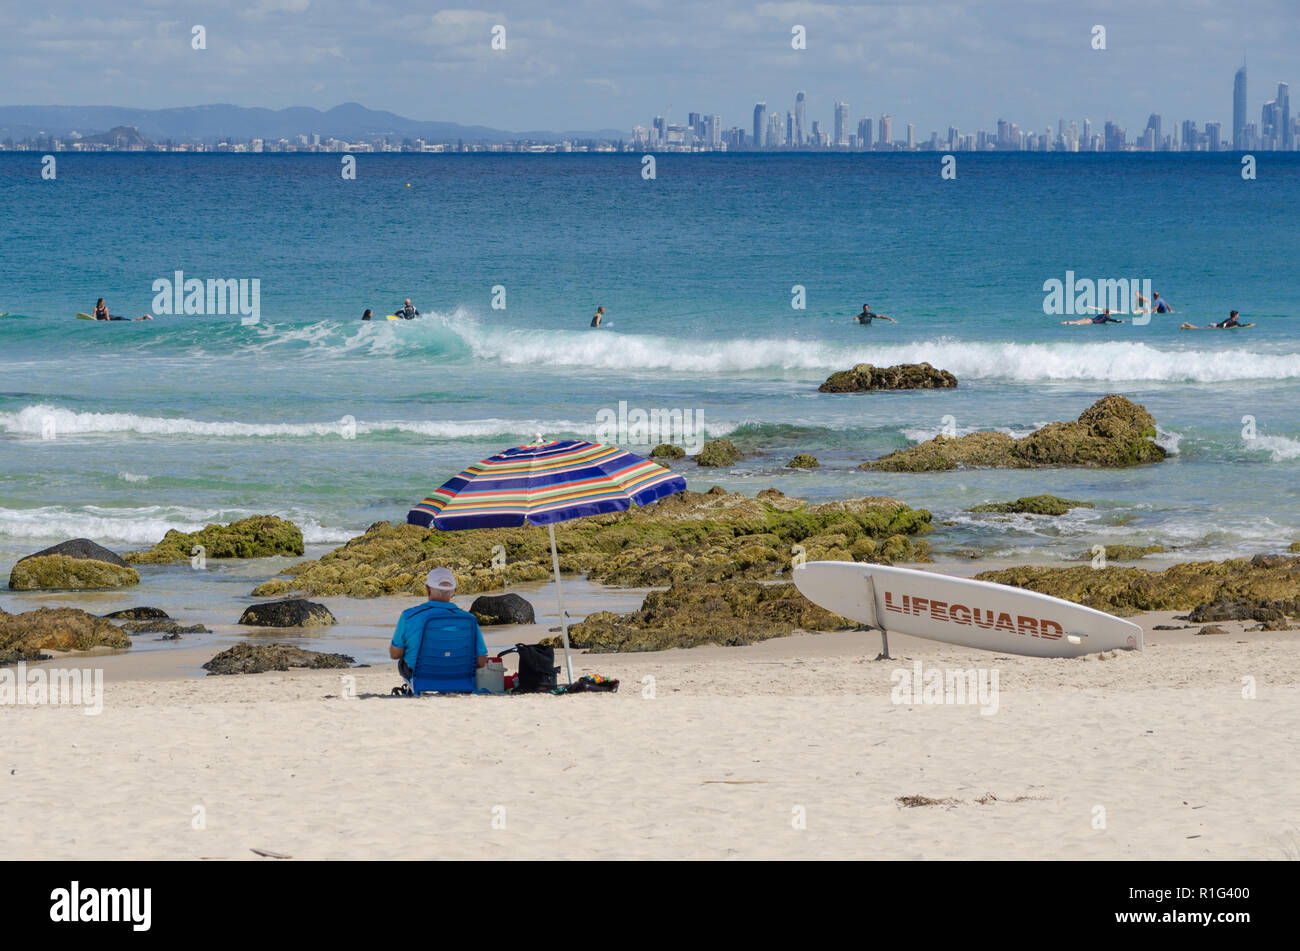 Lifeguard sits on beach in the shade of a umbrella watching surfers, with city skyline of Surf Paradise in background. Stock Photo